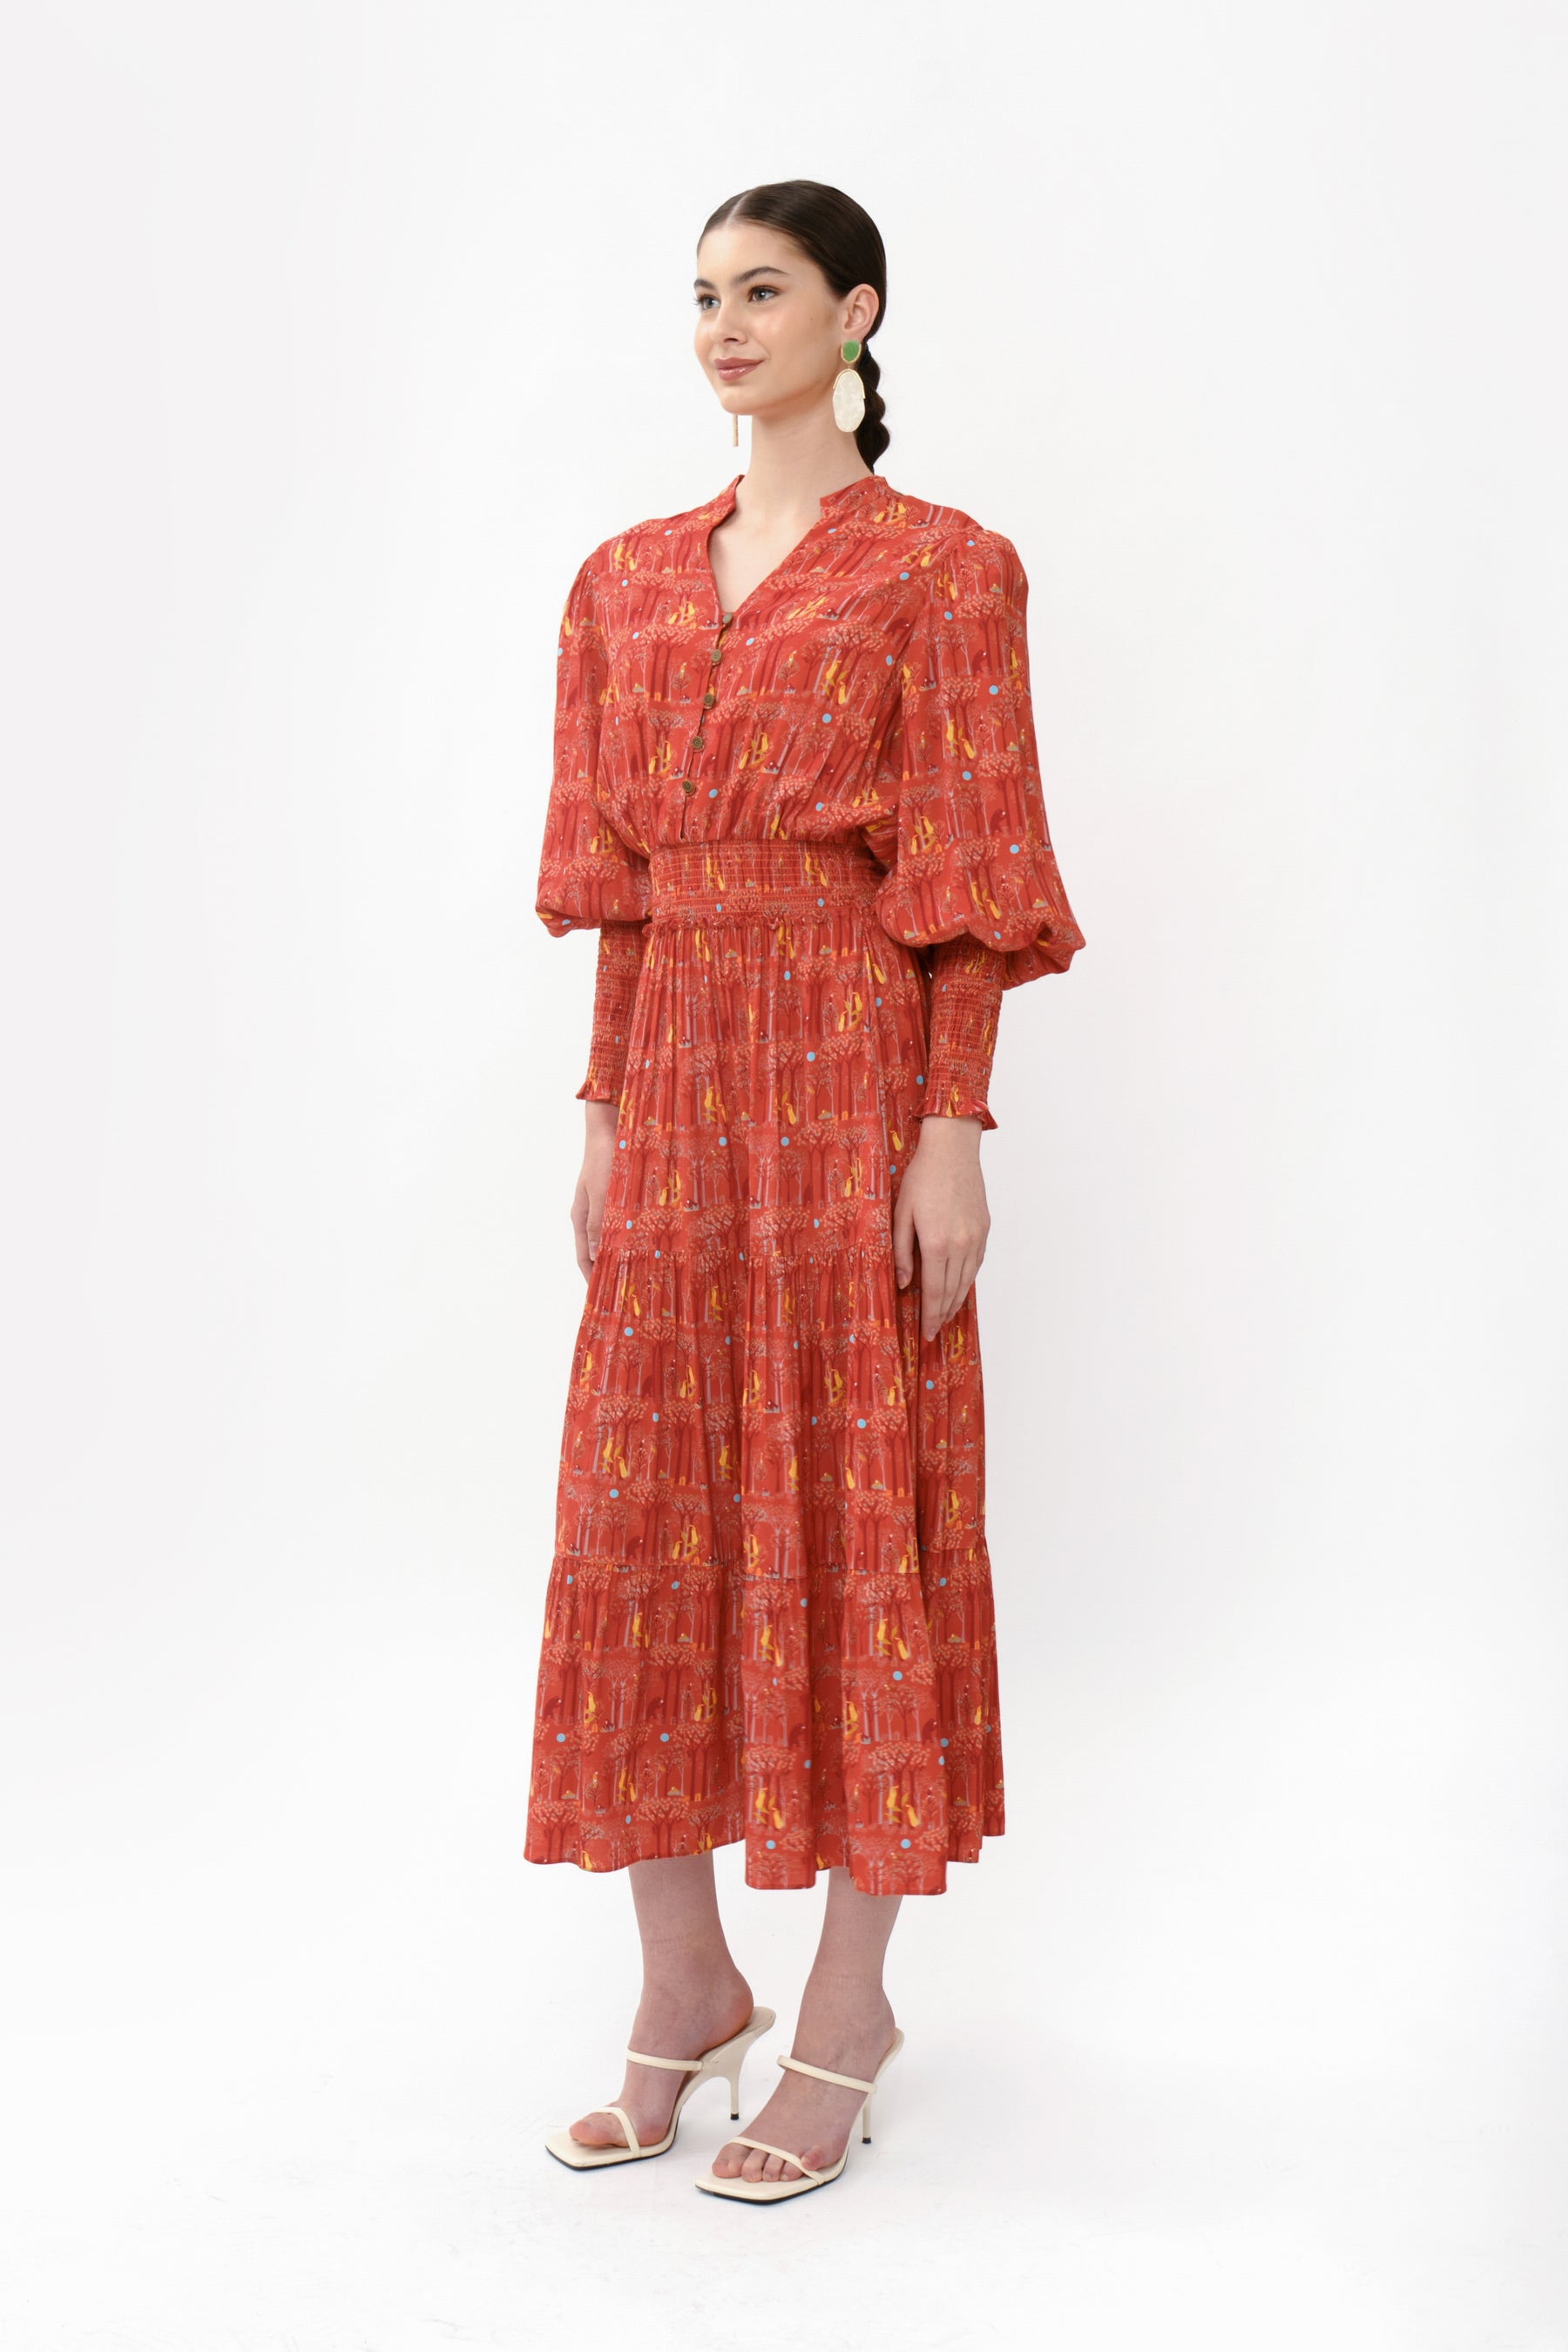 GINA Dress in Red Forest